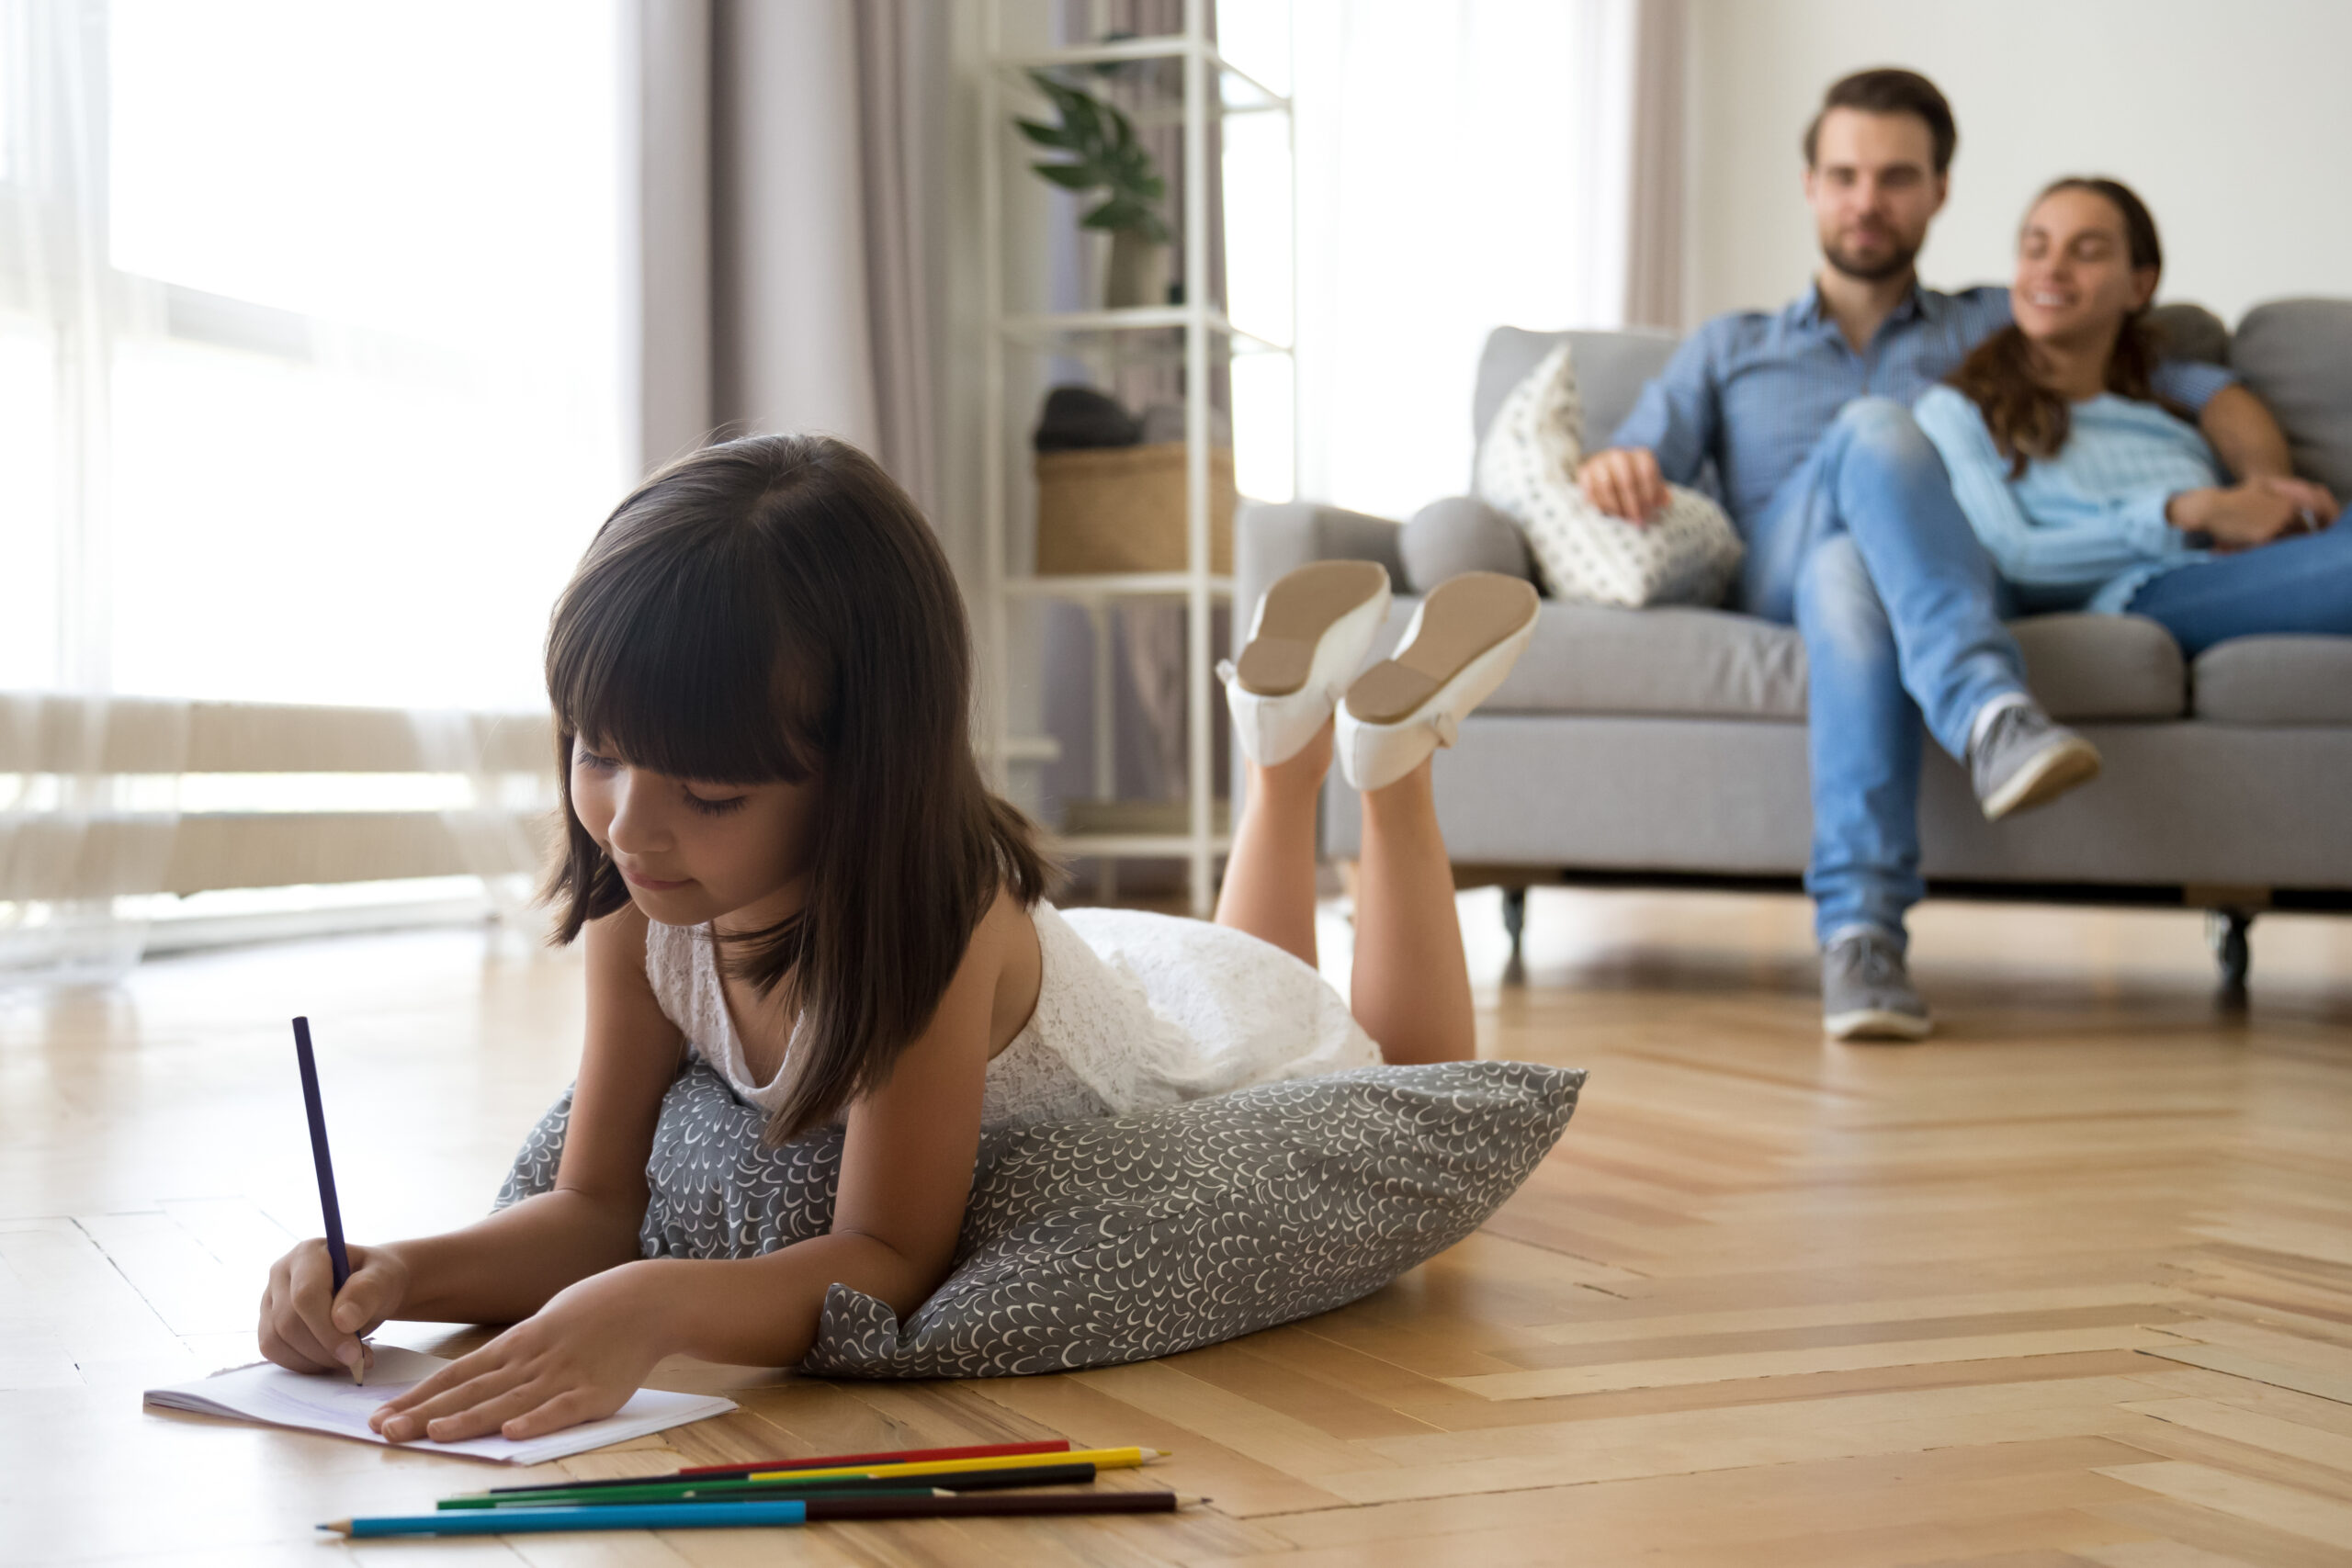 Daughter draws lying on warm floor parents sitting on couch in energy efficient home